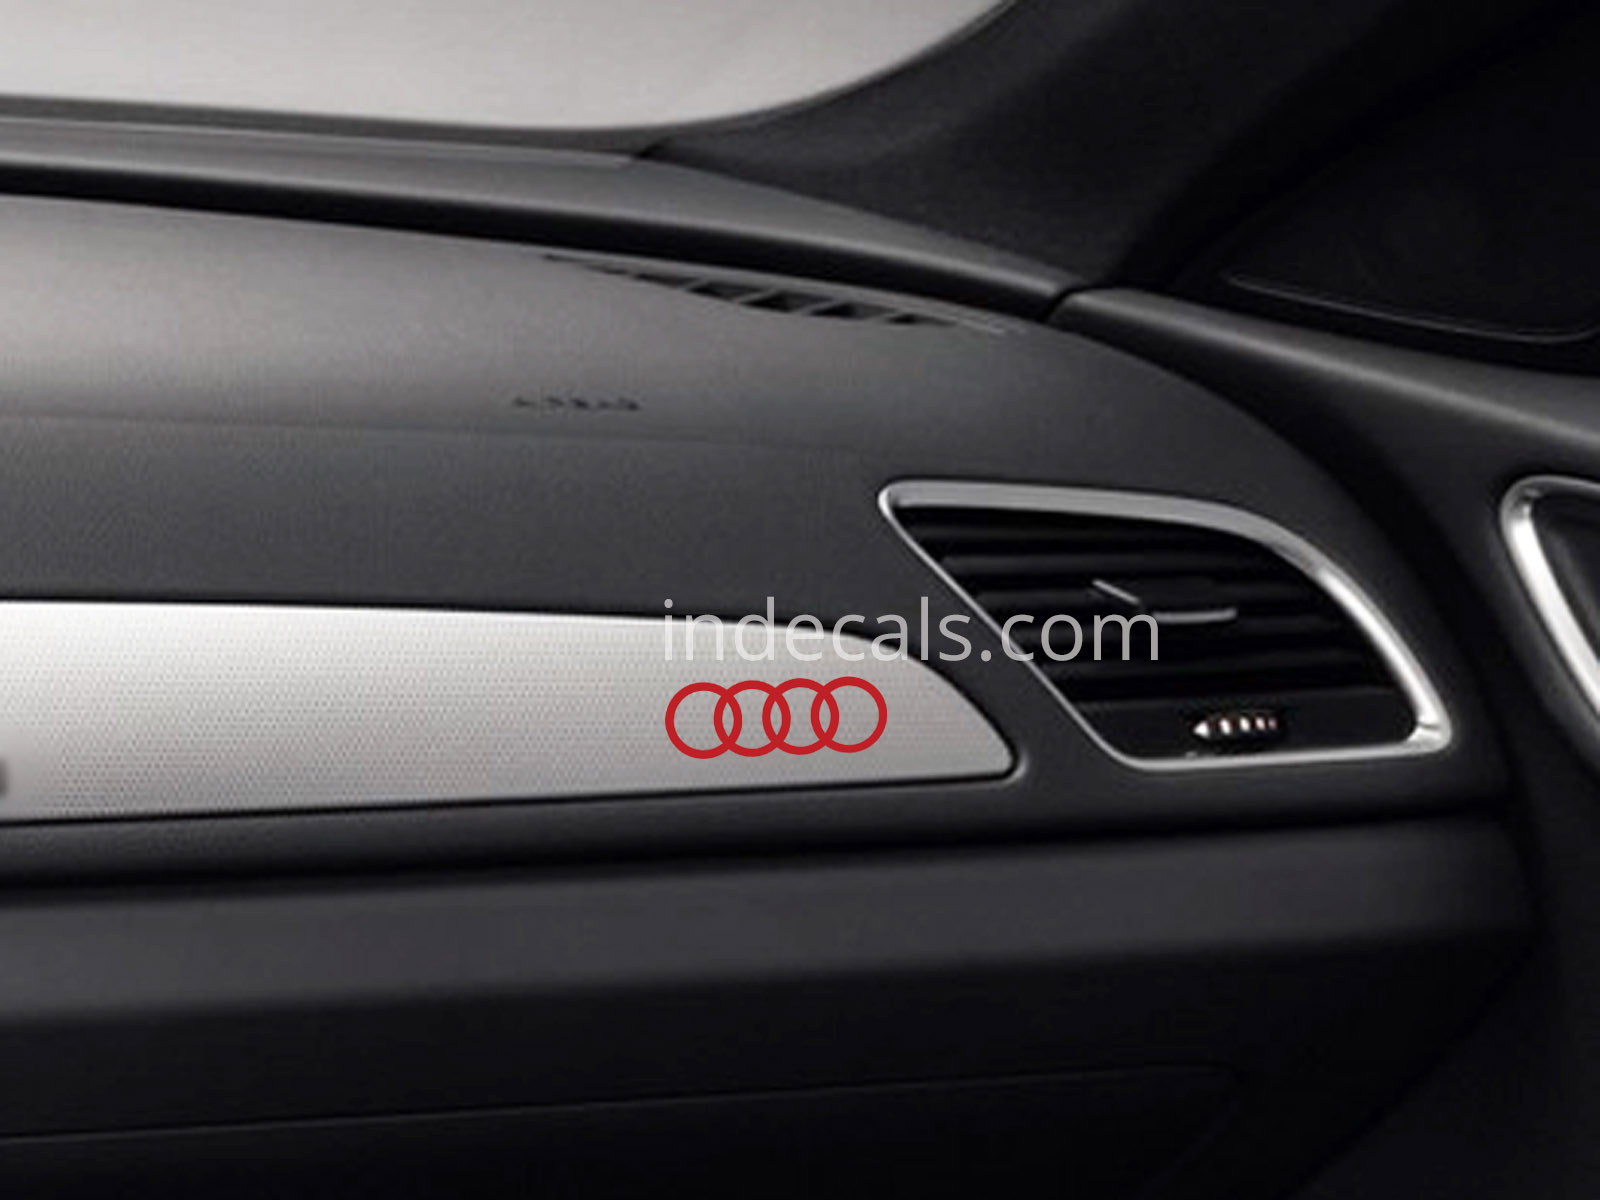 3 x Audi Rings Stickers for Dash Trim - Red